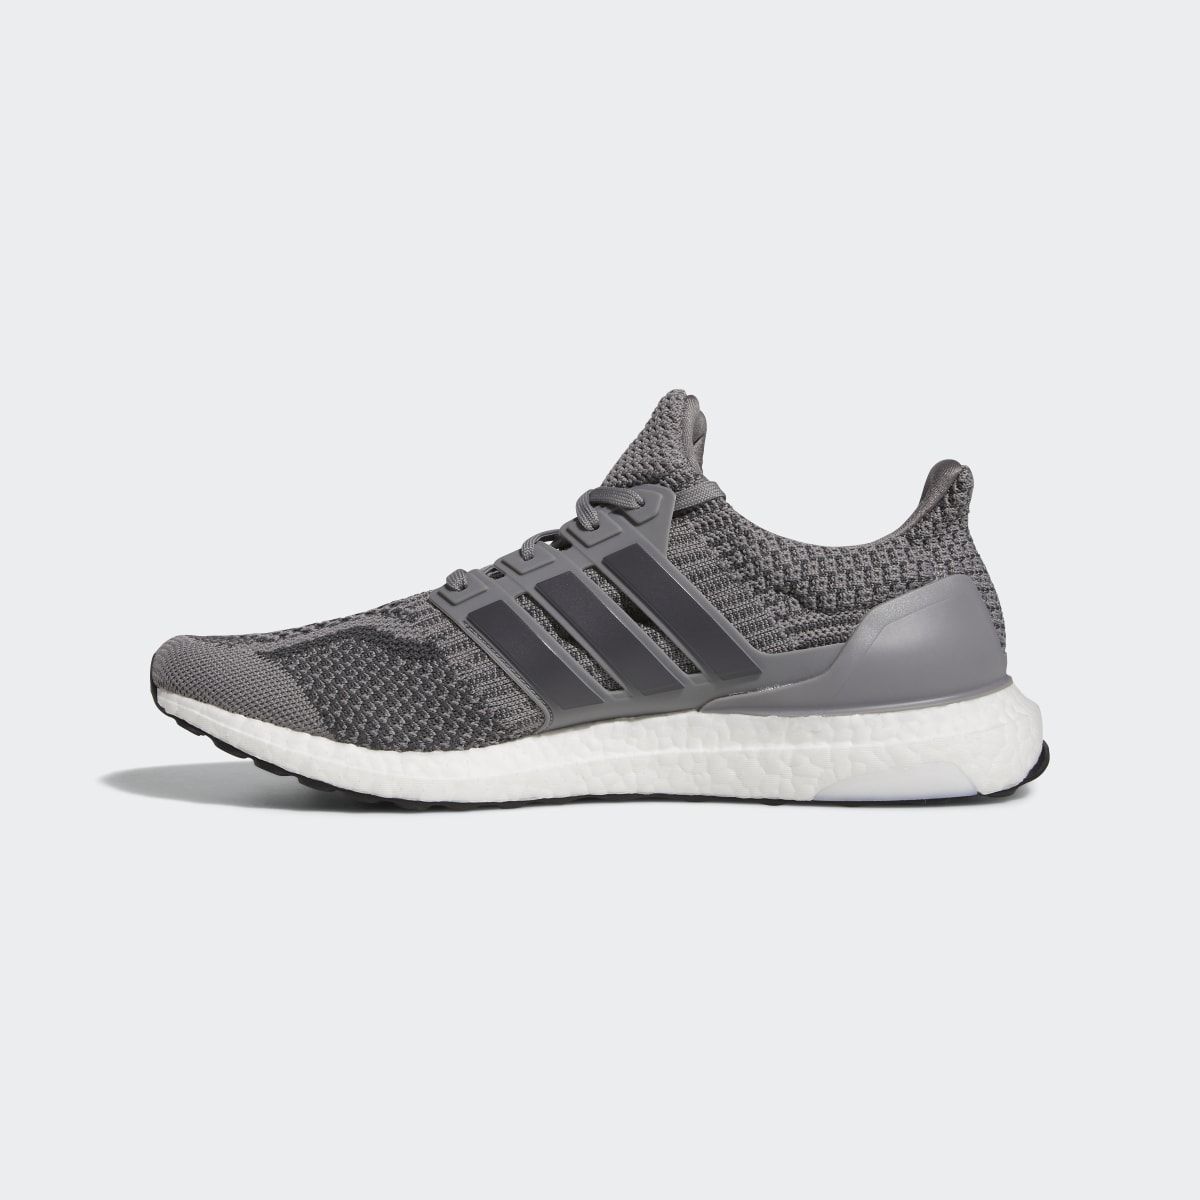 Adidas Ultraboost 5 DNA Running Lifestyle Shoes. 7